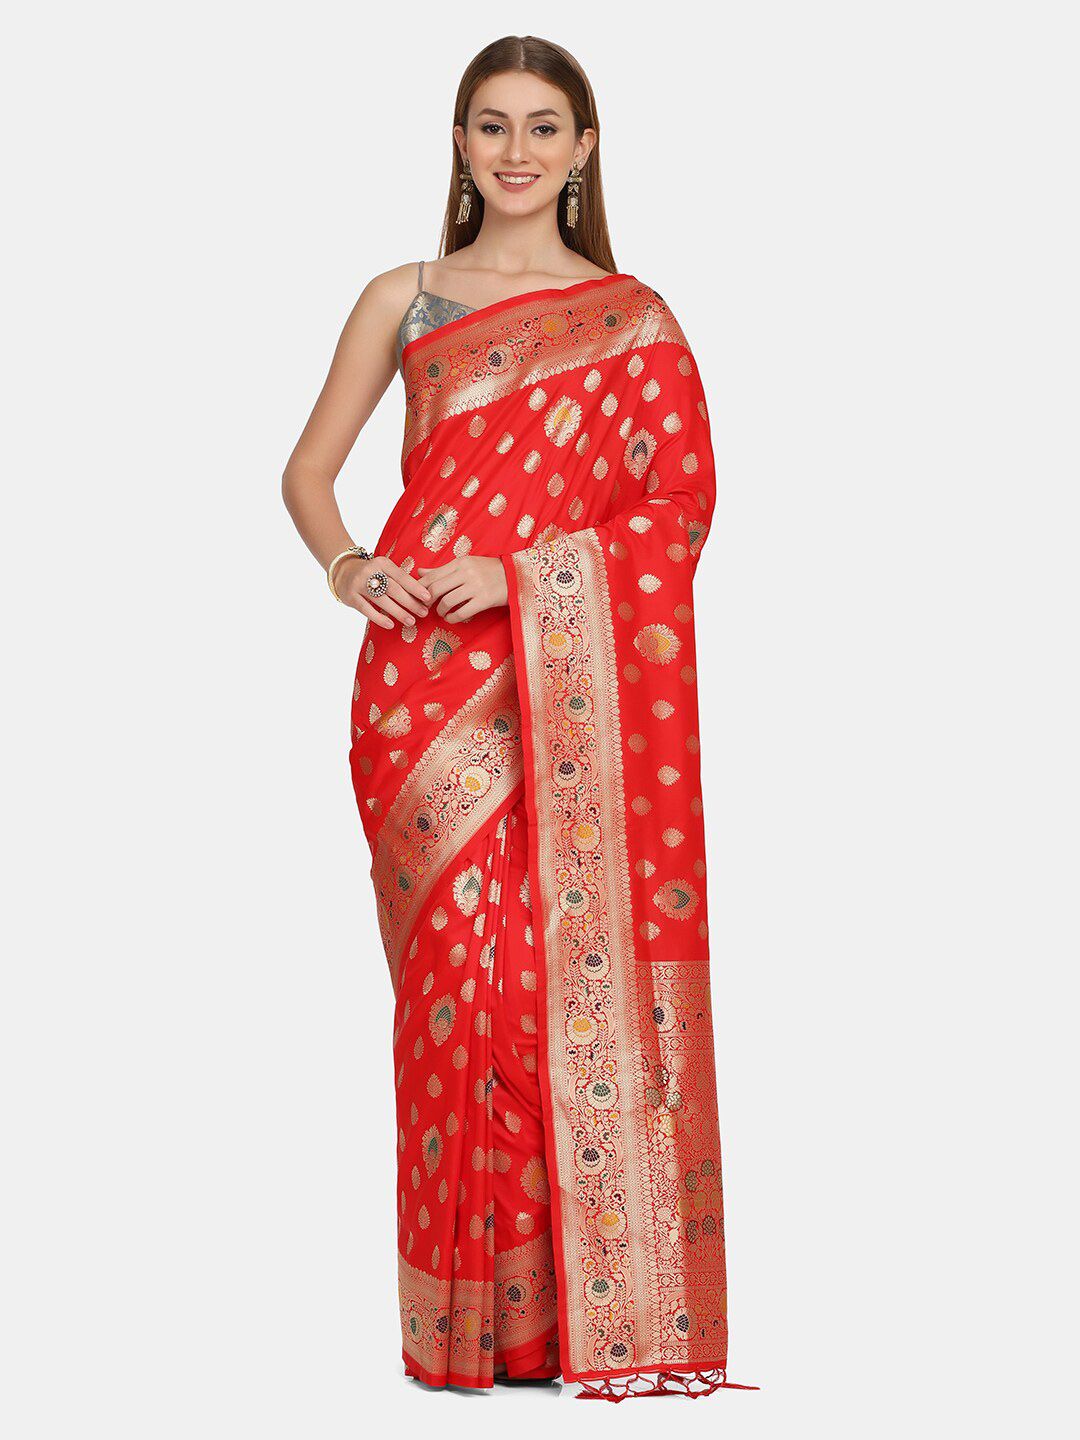 BOMBAY SELECTIONS Red & Gold-Toned Floral Pure Silk Banarasi Saree Price in India